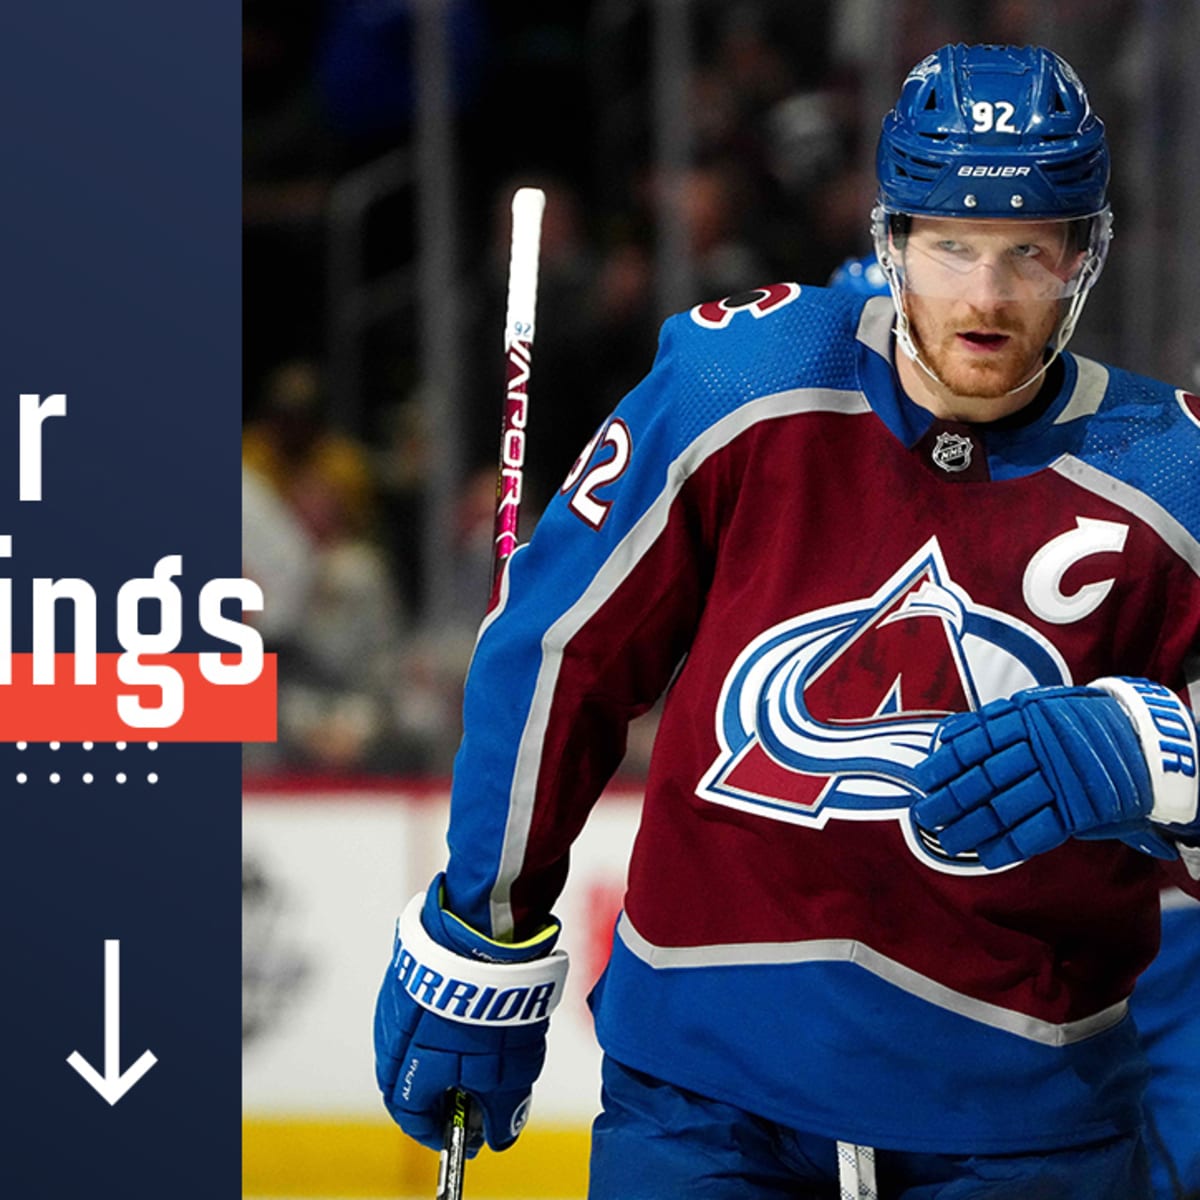 2021 NHL front office rankings: Fans weigh in on every team - The Athletic